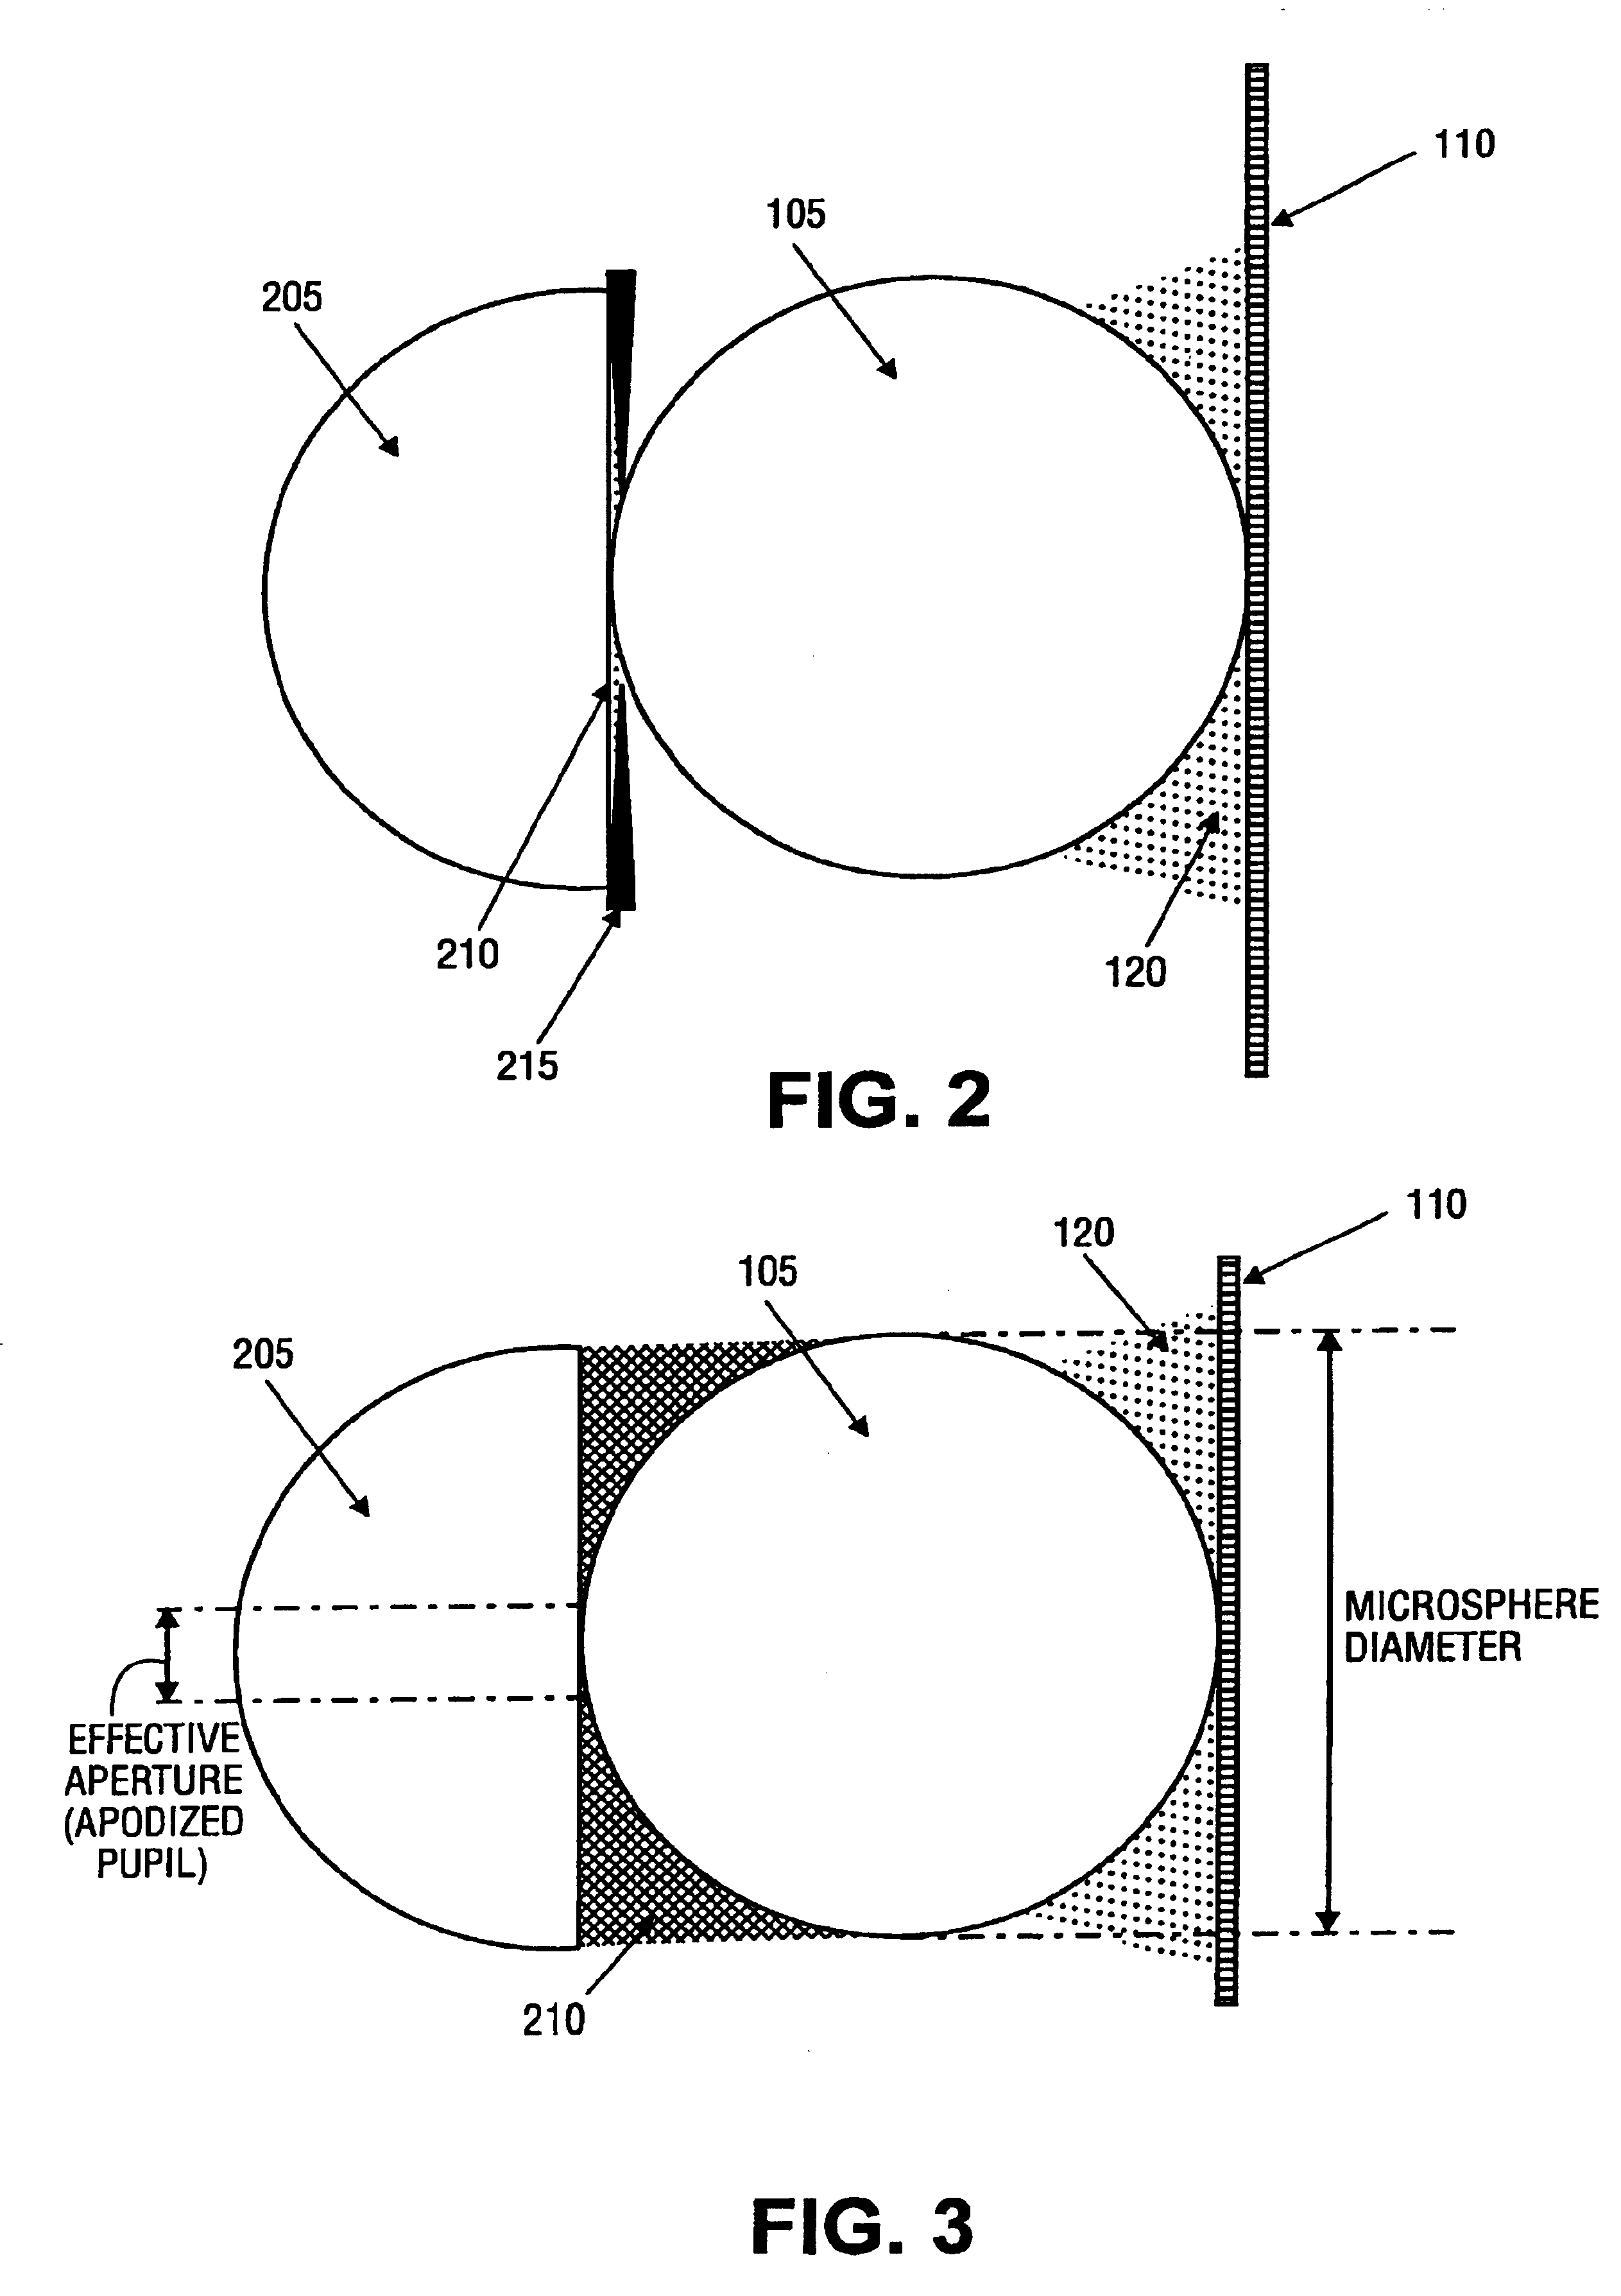 Design and fabrication process for a lens system optically coupled to an image-capture device